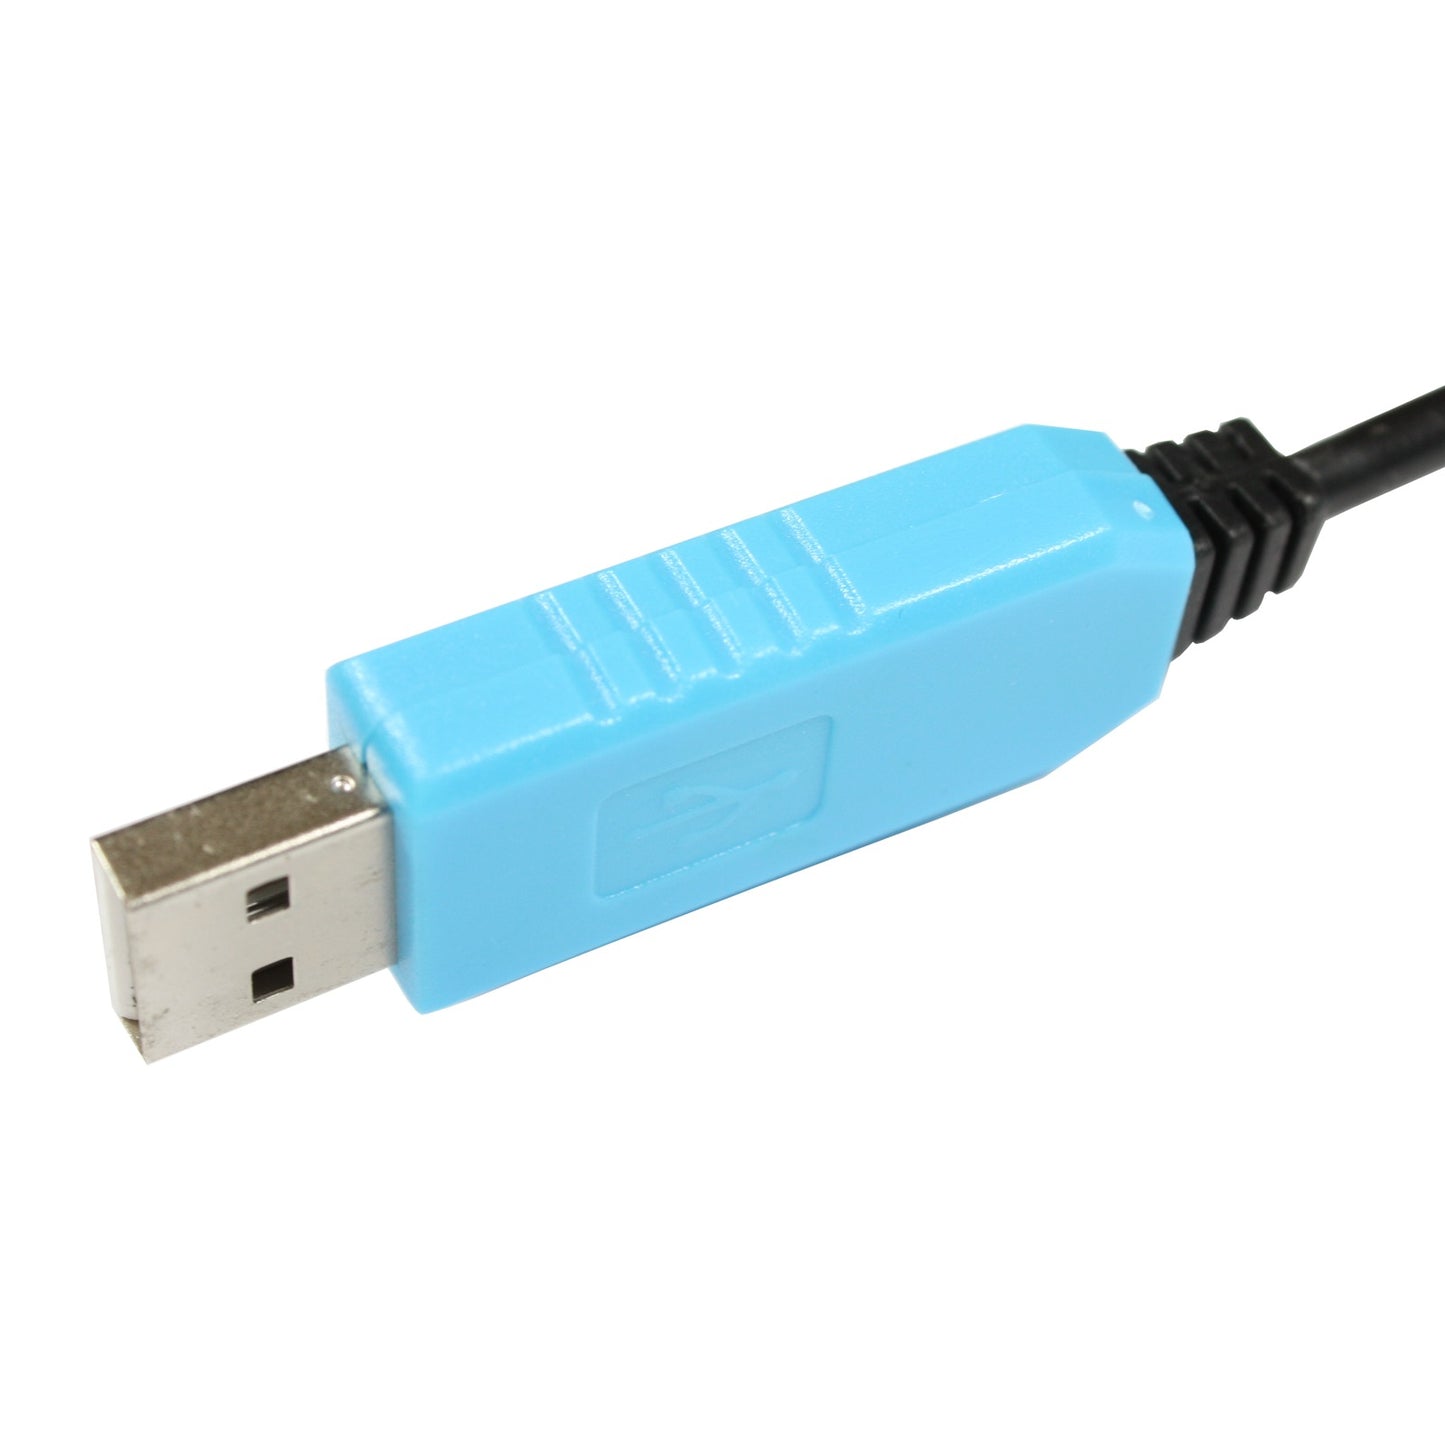 USB to TTL, UART-Converter-Cable, Serial Connector, PL2303TA compatible